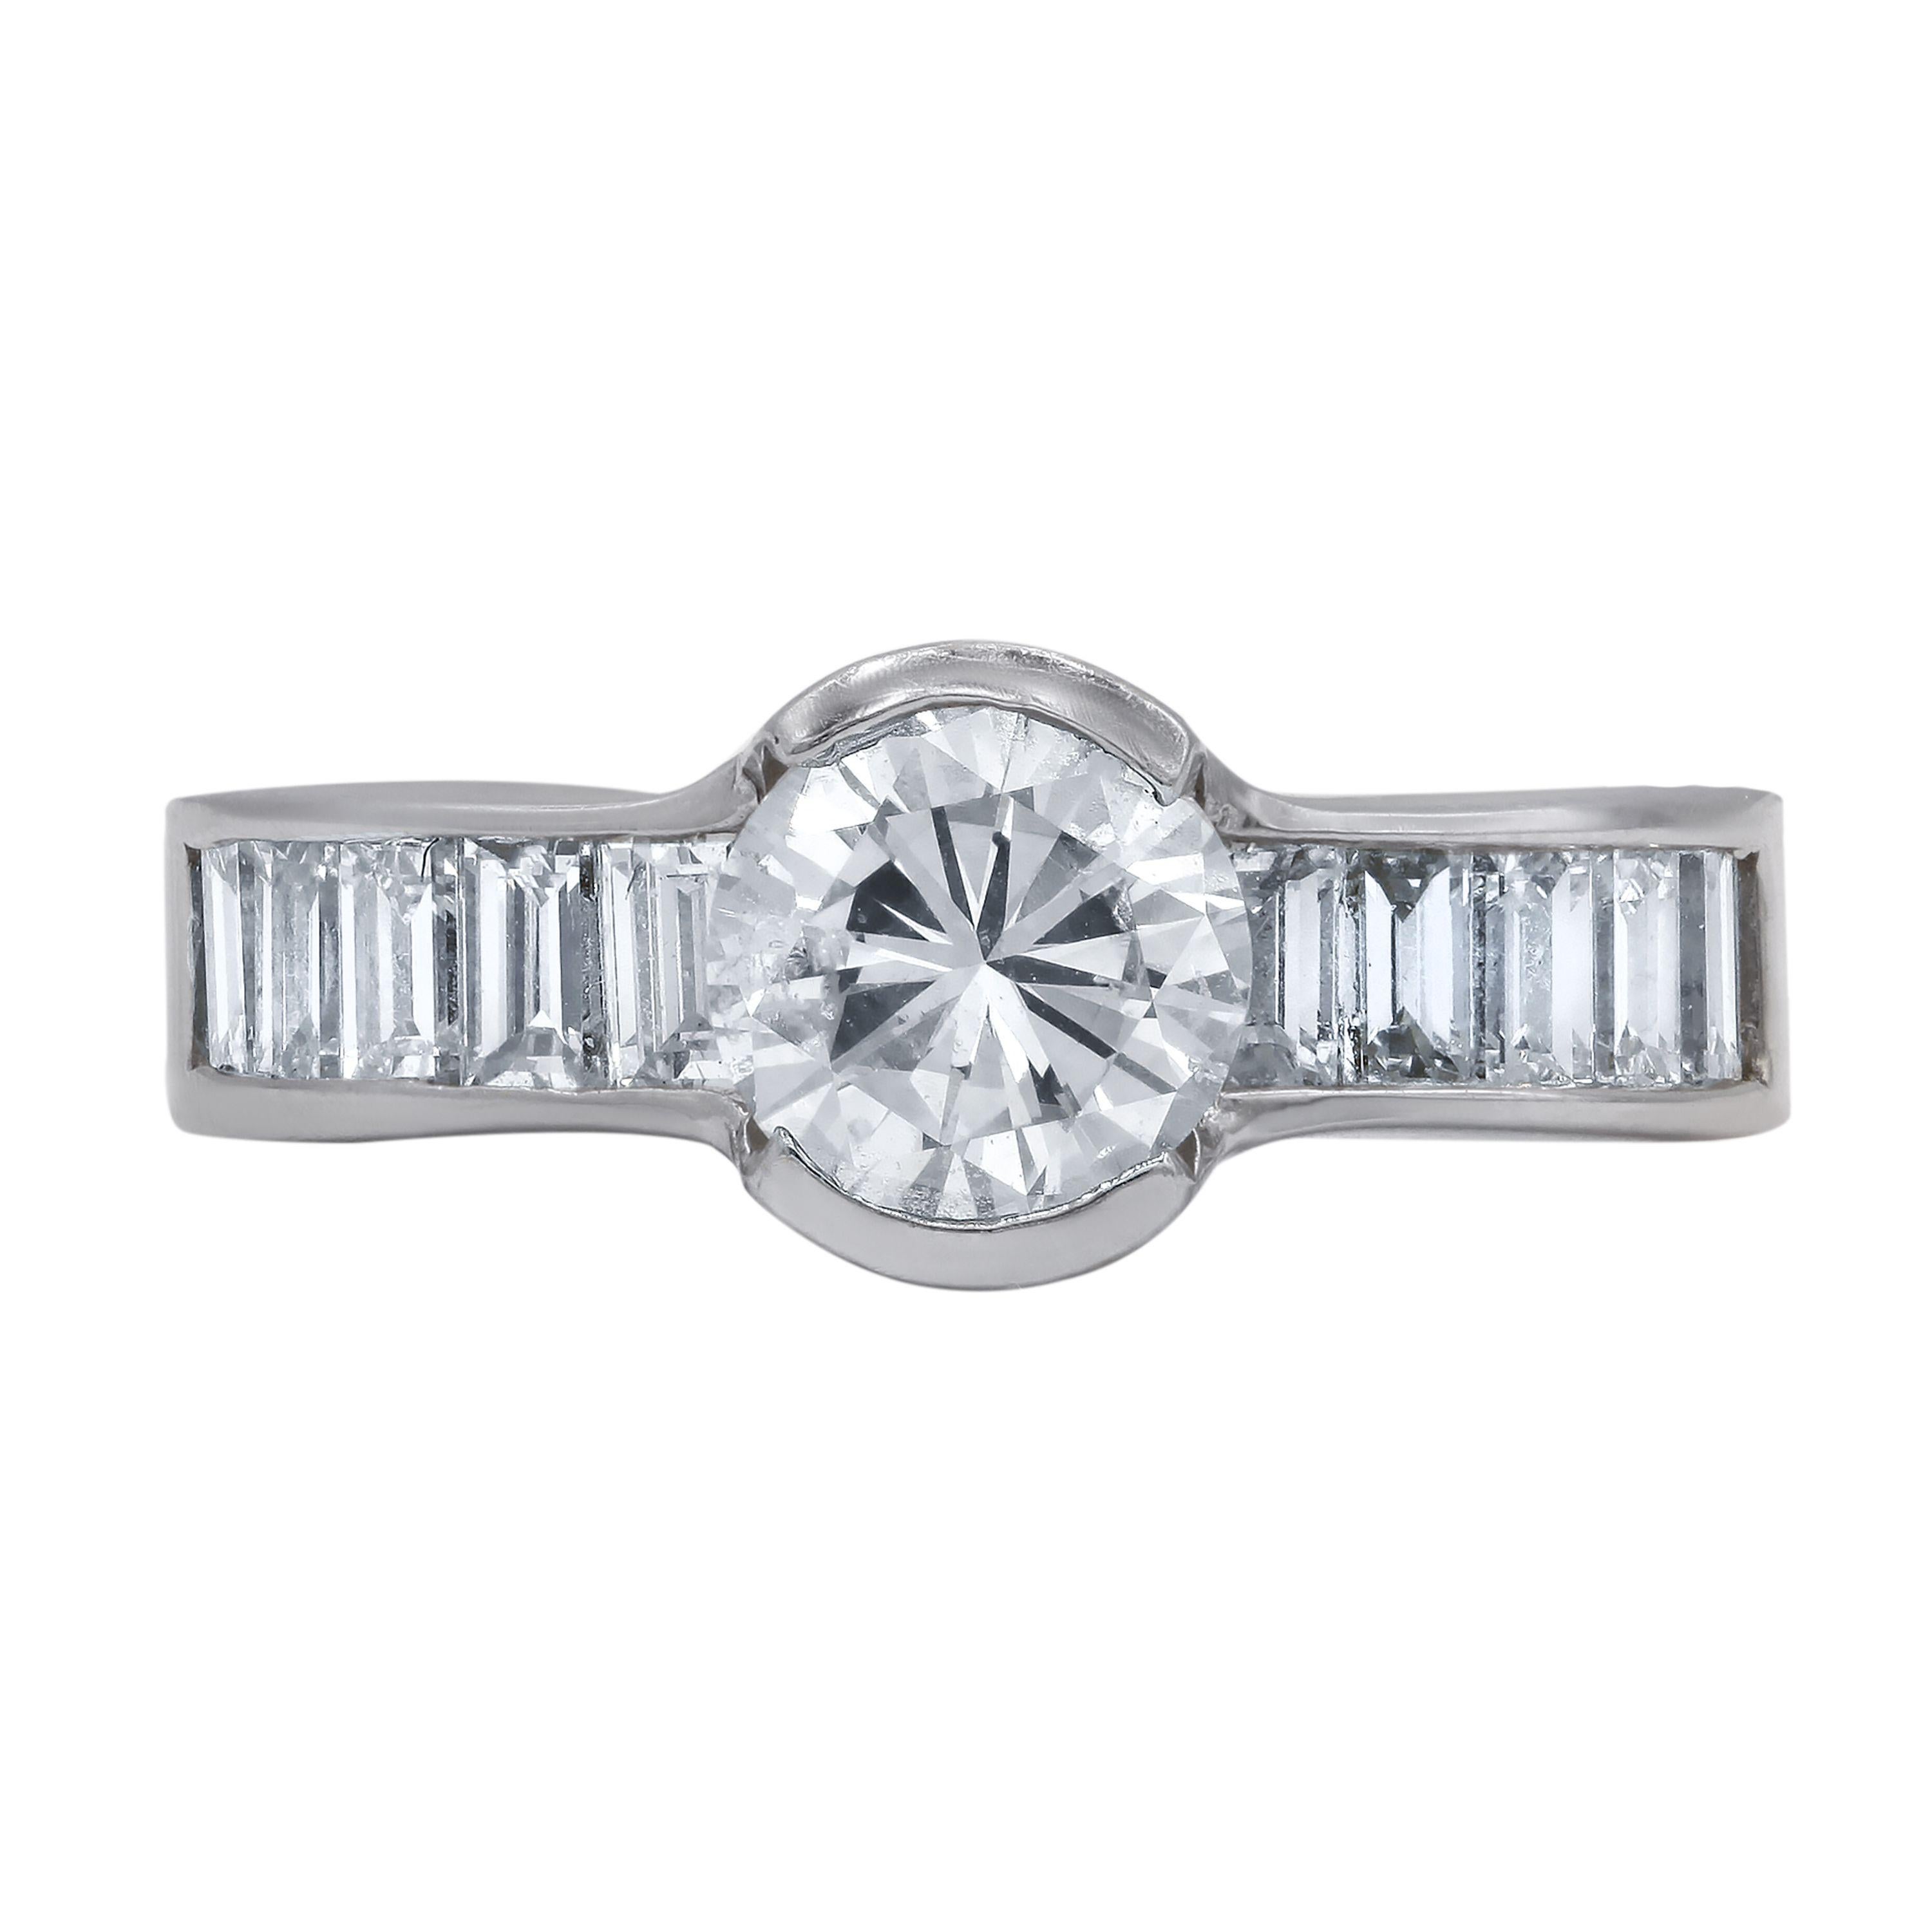 14k white gold engagement ring with main round 1.27ct stone and additional baguette diamonds in 1.25ct.
